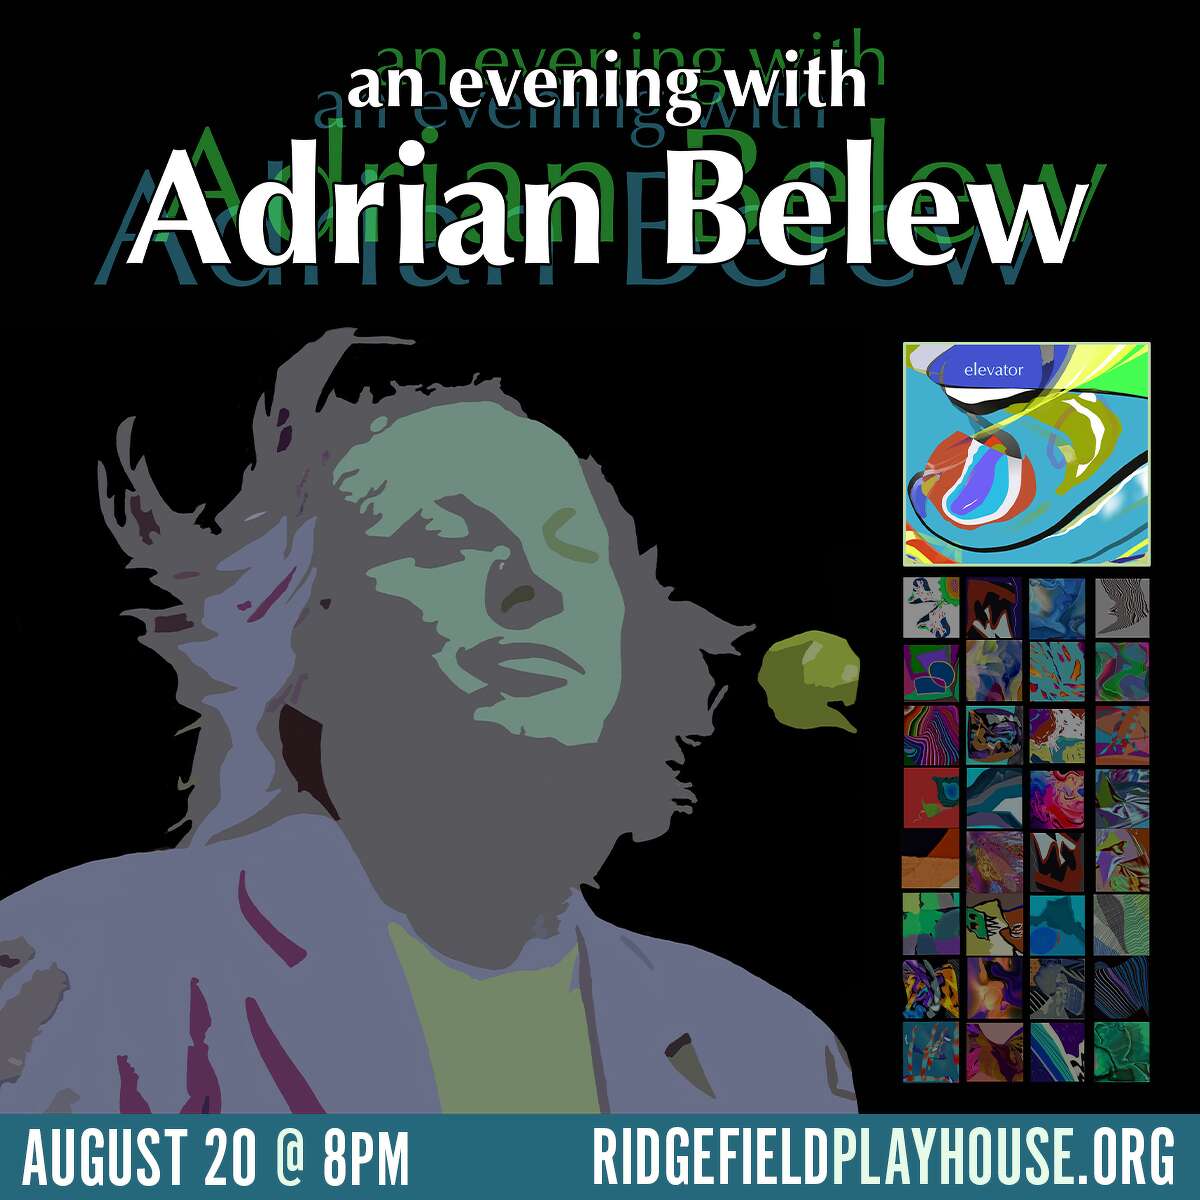 Progressive rock icon Adrian Belew will play for longtime local fans at The Ridgefield Playhouse on Aug. 20 — his first show there in almost a decade.